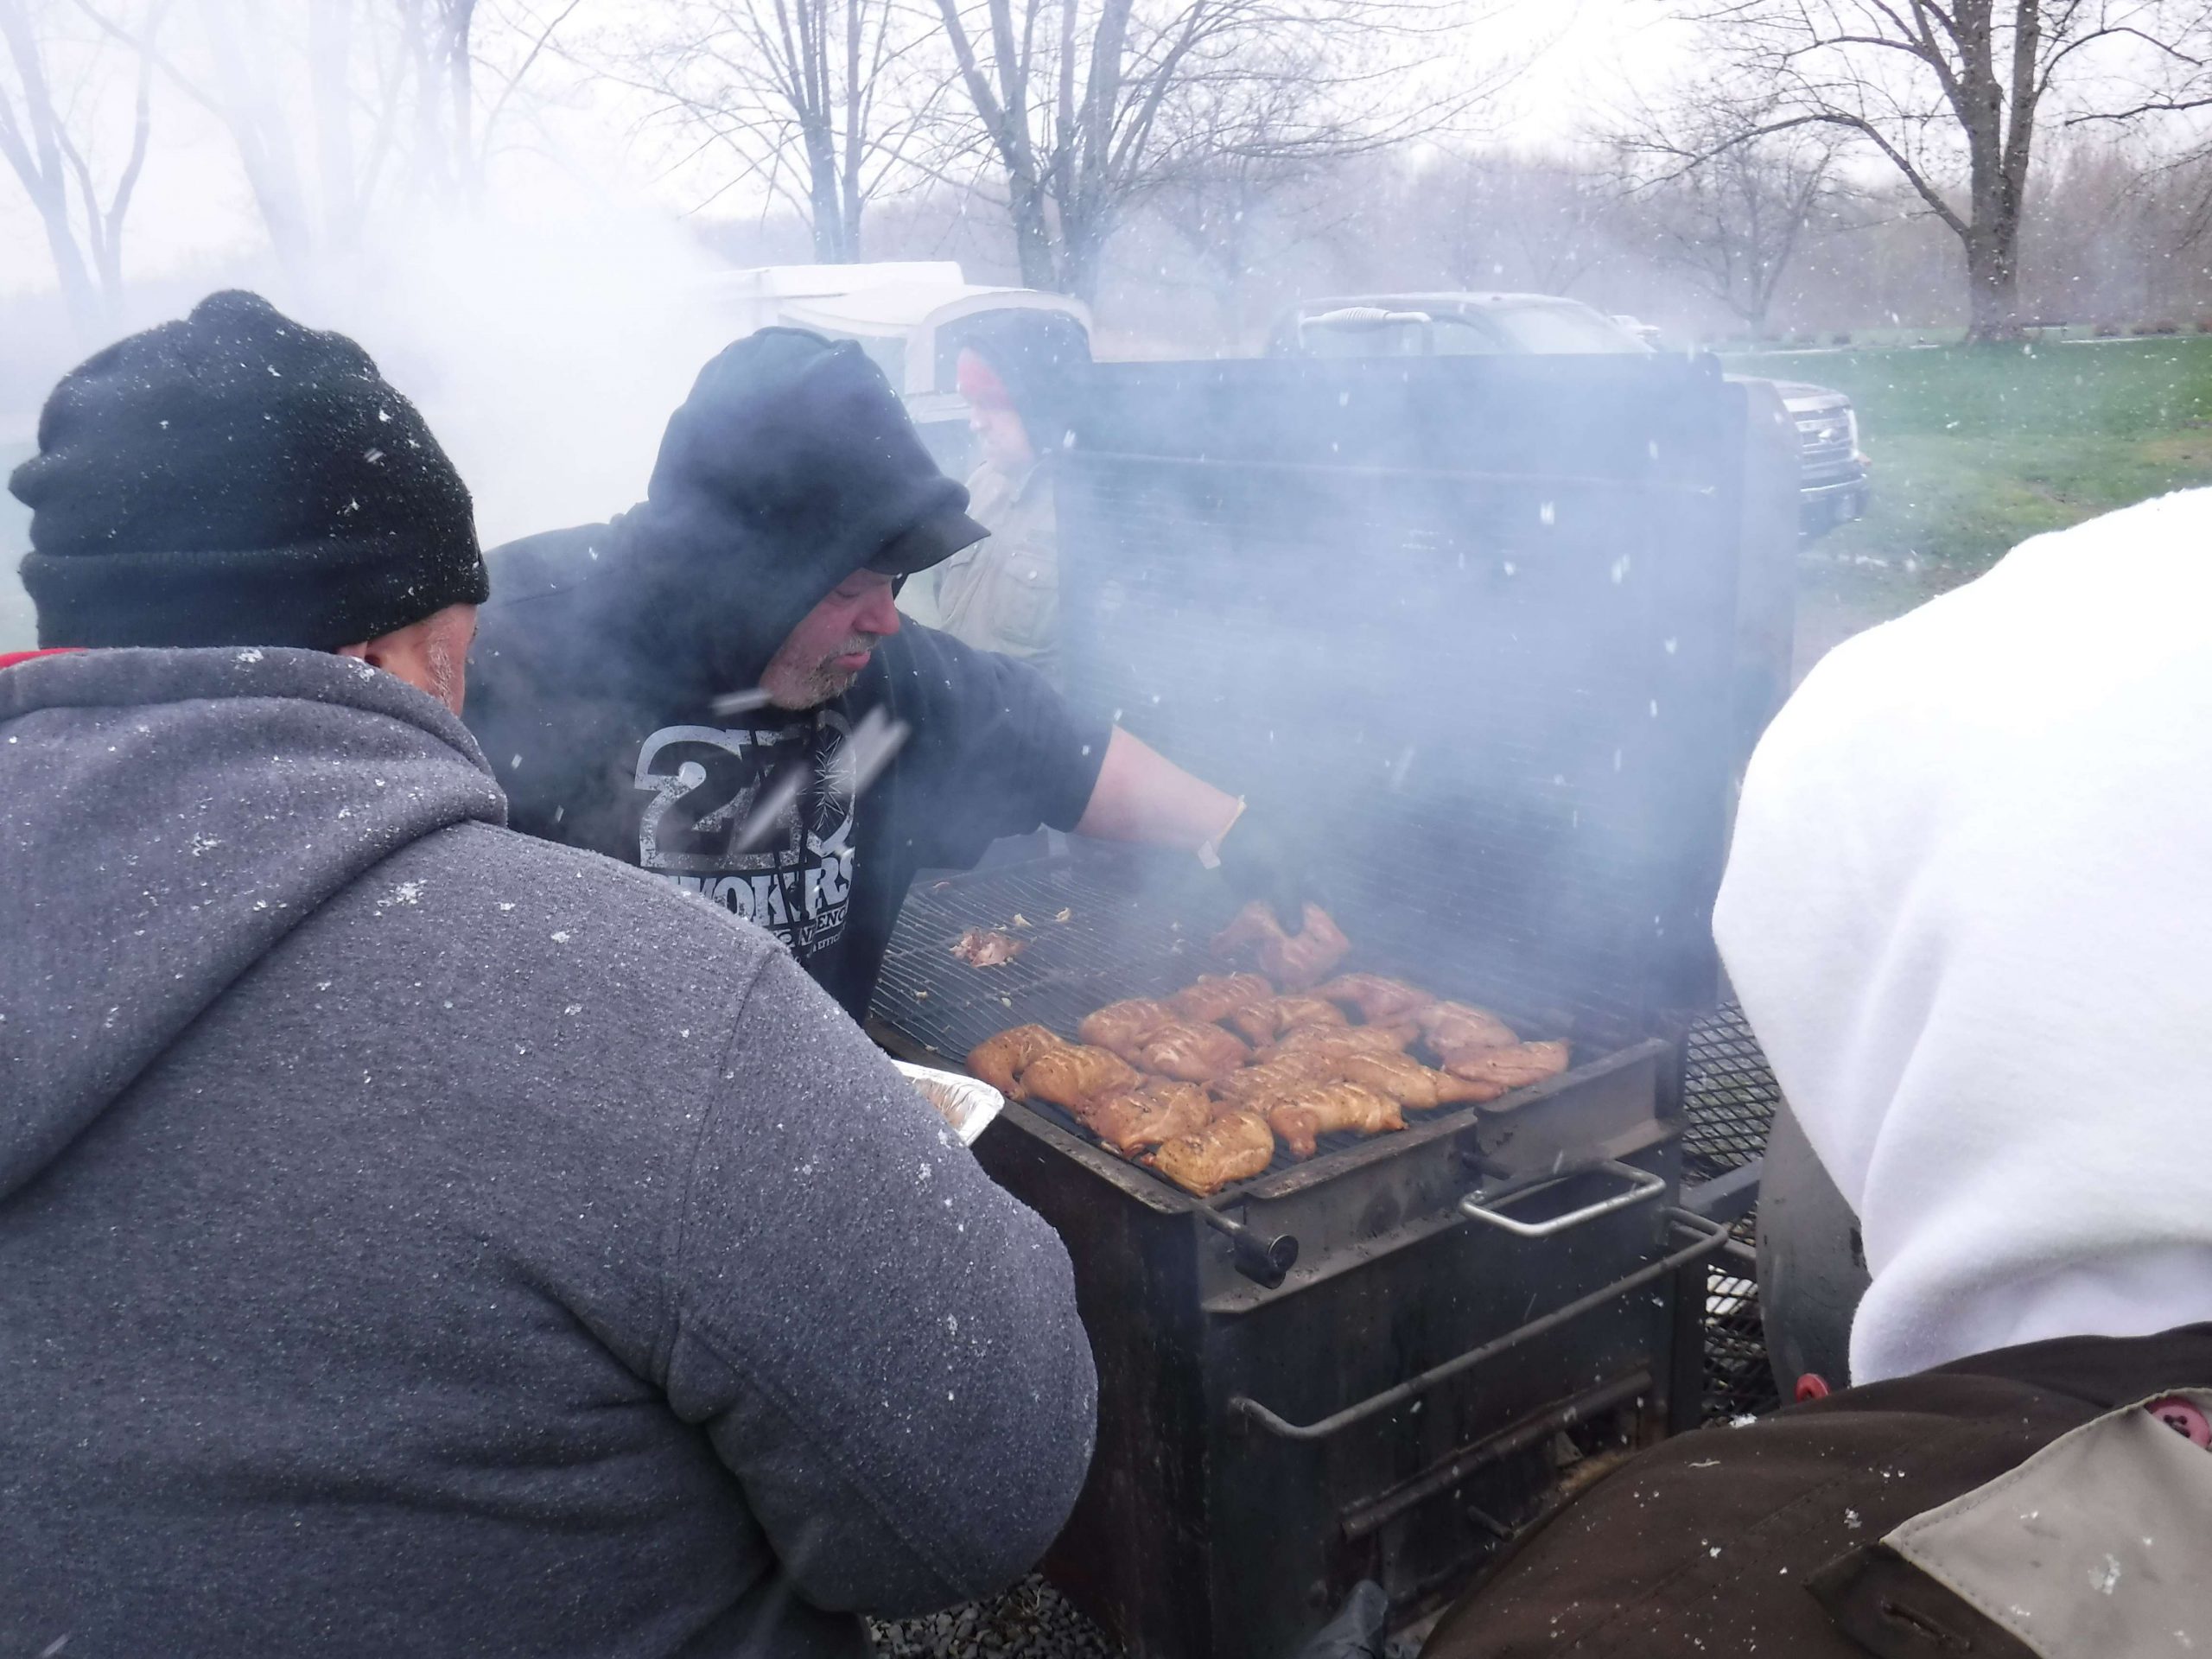 The Barbeque Crew at work. Every year this crew that competes in barbecue competitions cooks for the volunteers. Yes, that is snowflakes with wind gusts at times of 10 to 20 mph.